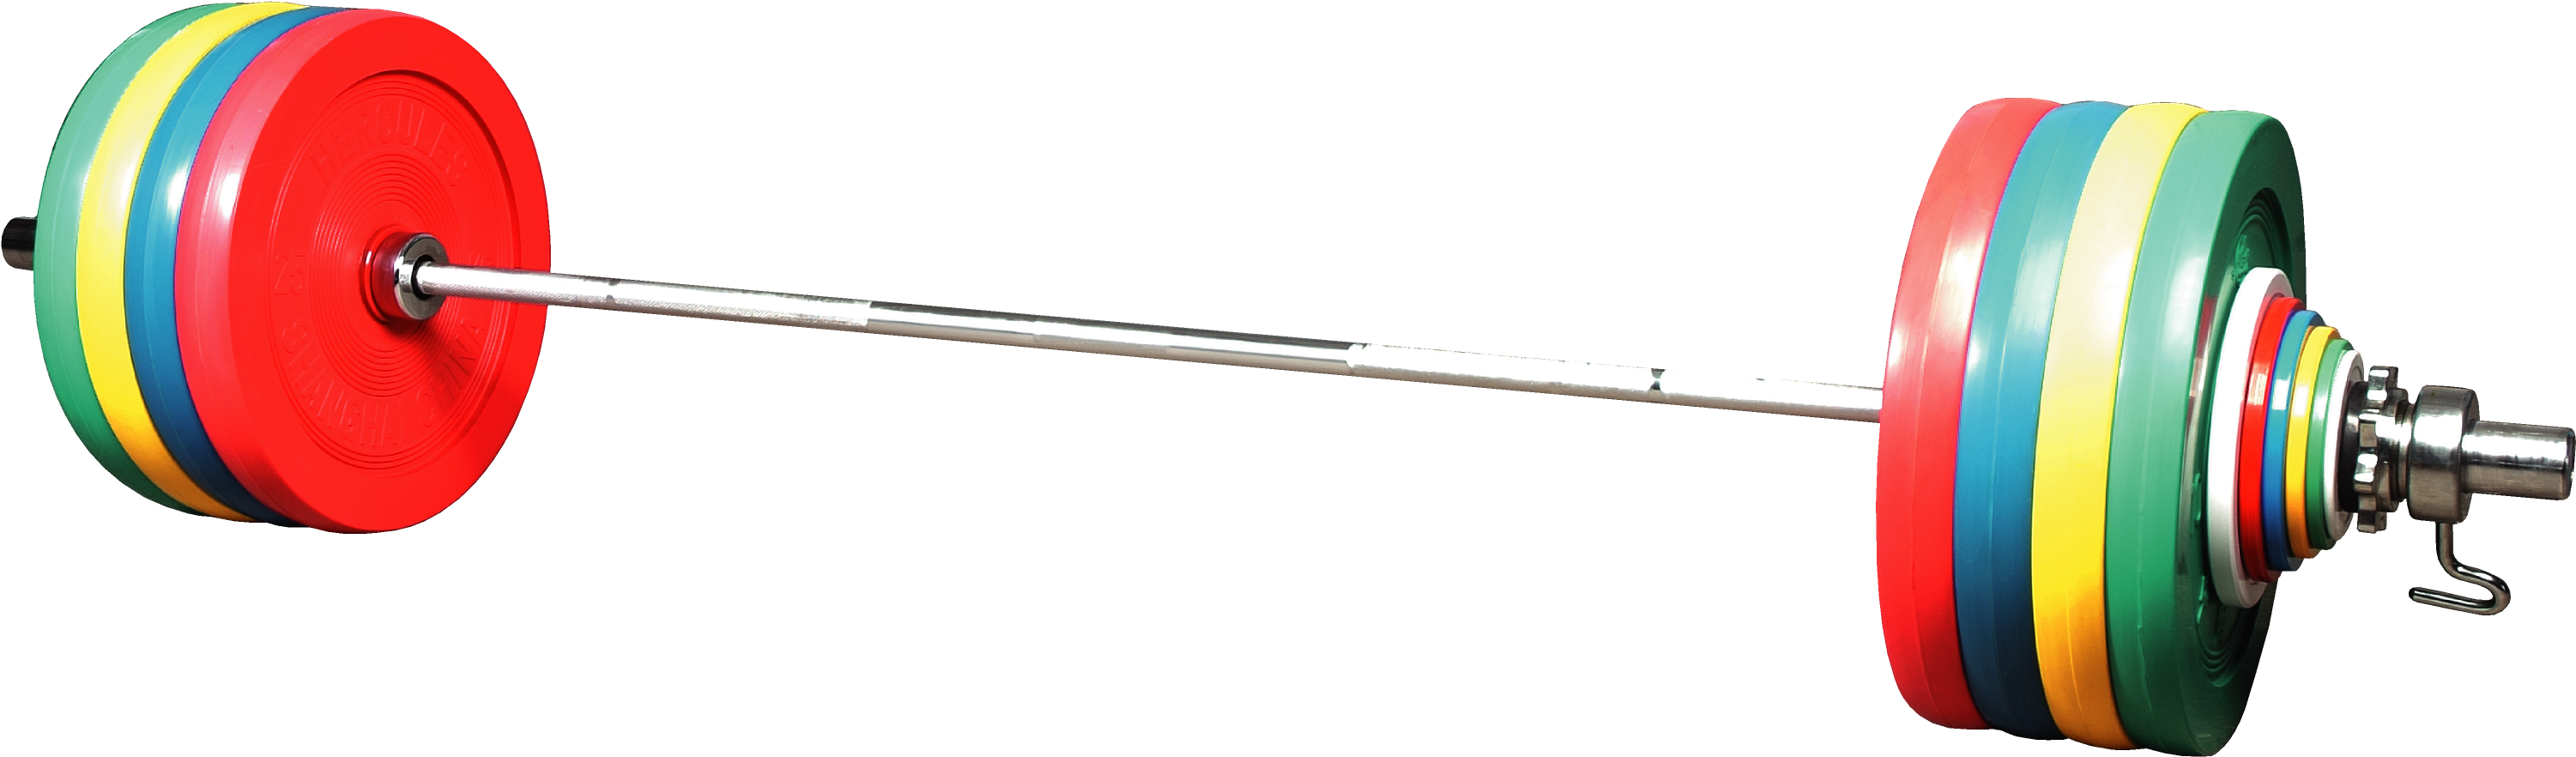 A Silver Metal Rod With A Black Background